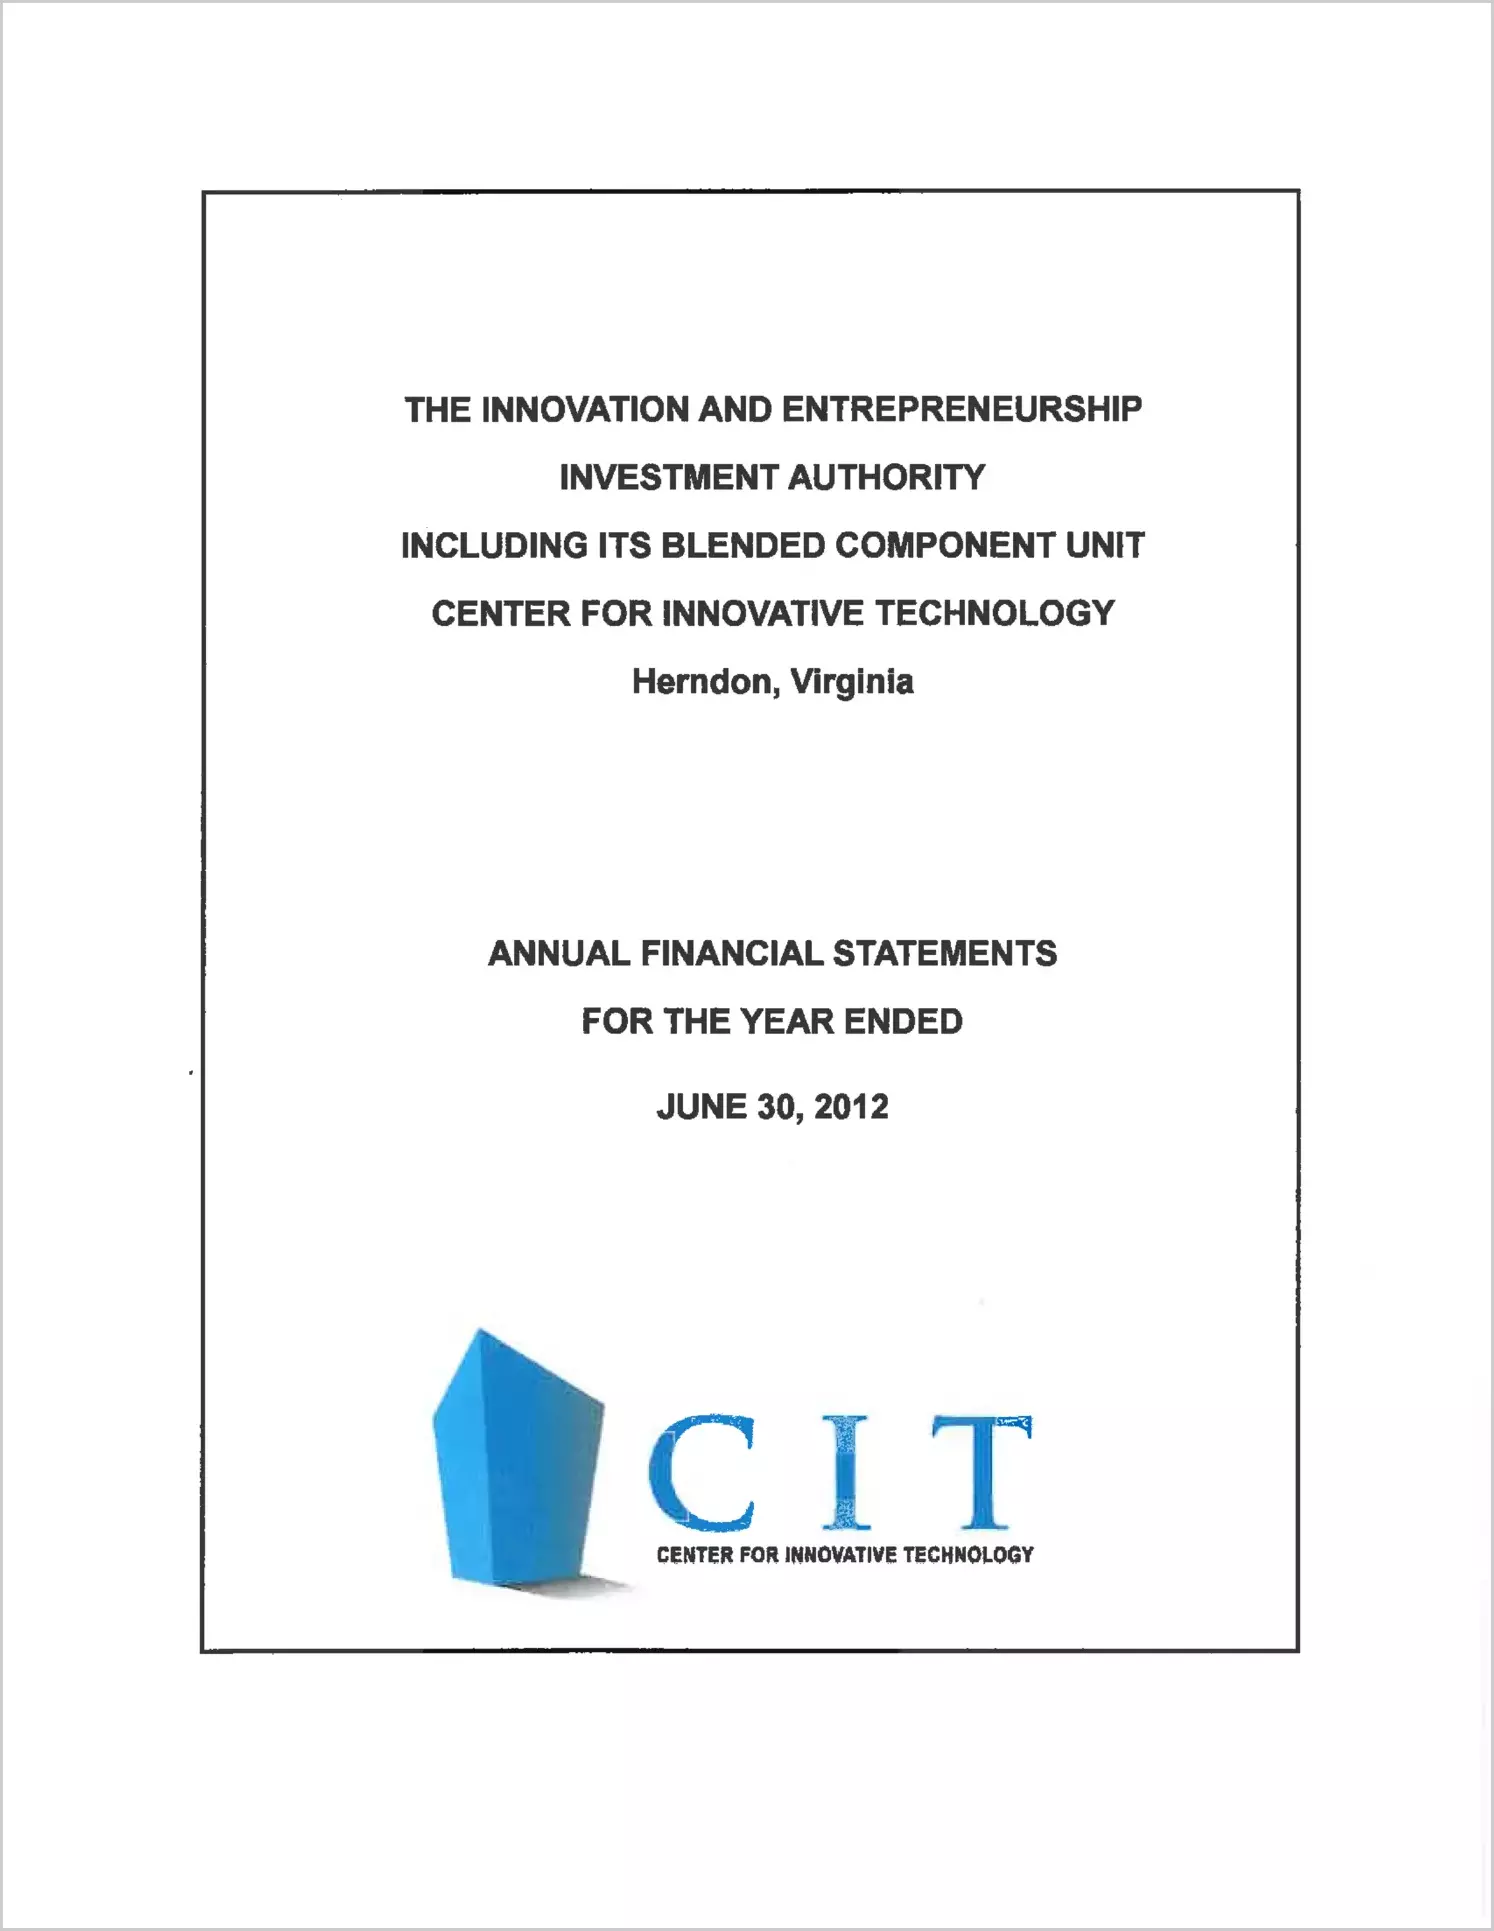 Innovation and Entrepreneurship Investment Authority Including Its Blended Component Unit Center for Innovative Technology  Financial Statement Report for the year ended June 30, 2012